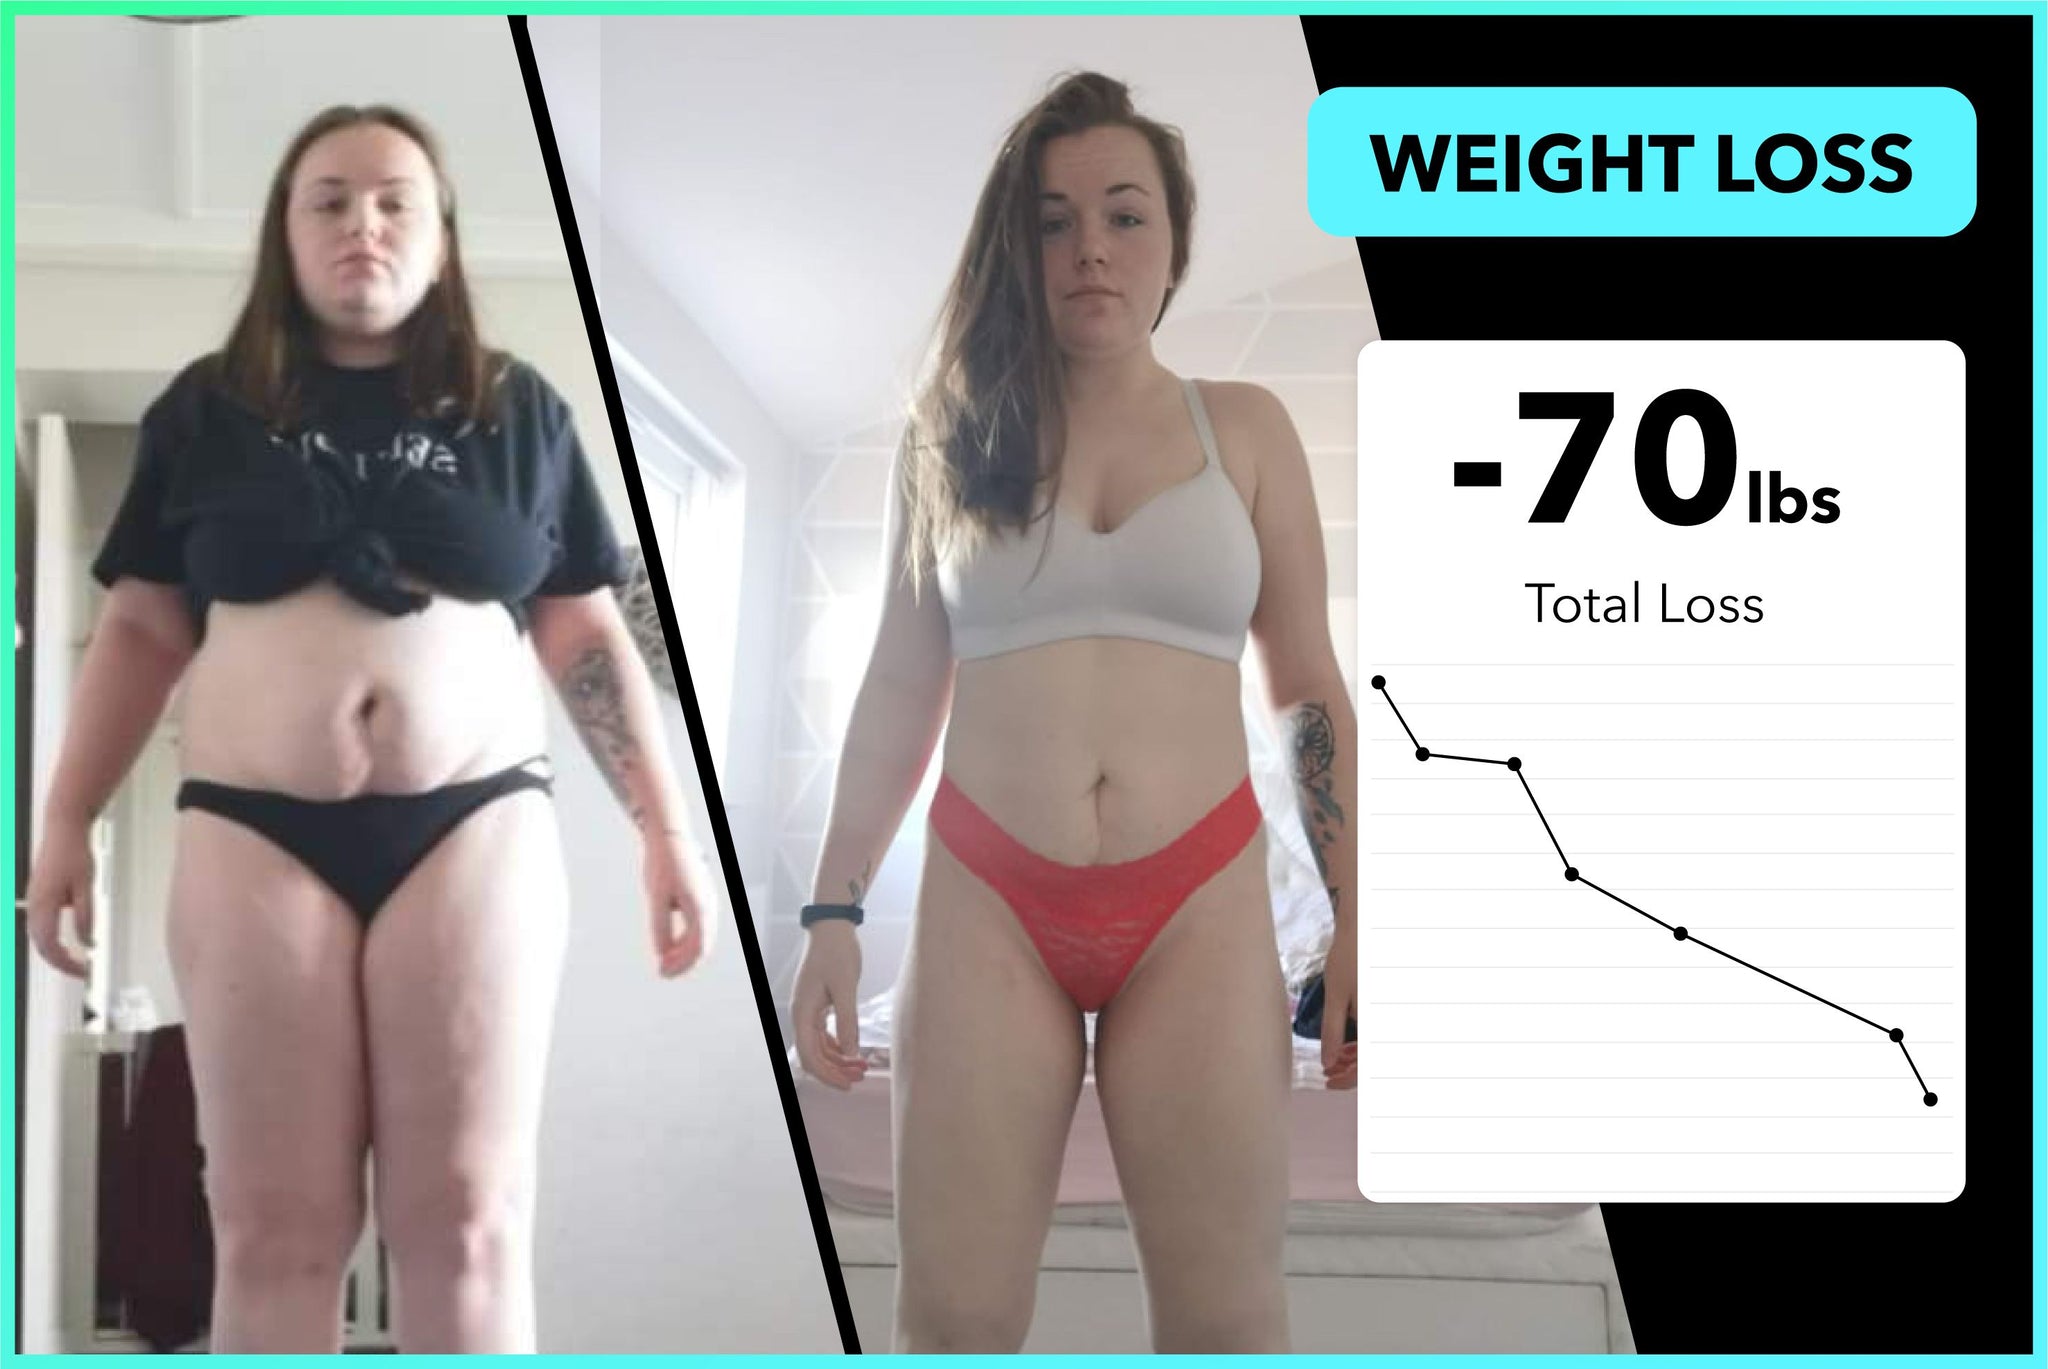 This is how Charlee lost 70lbs